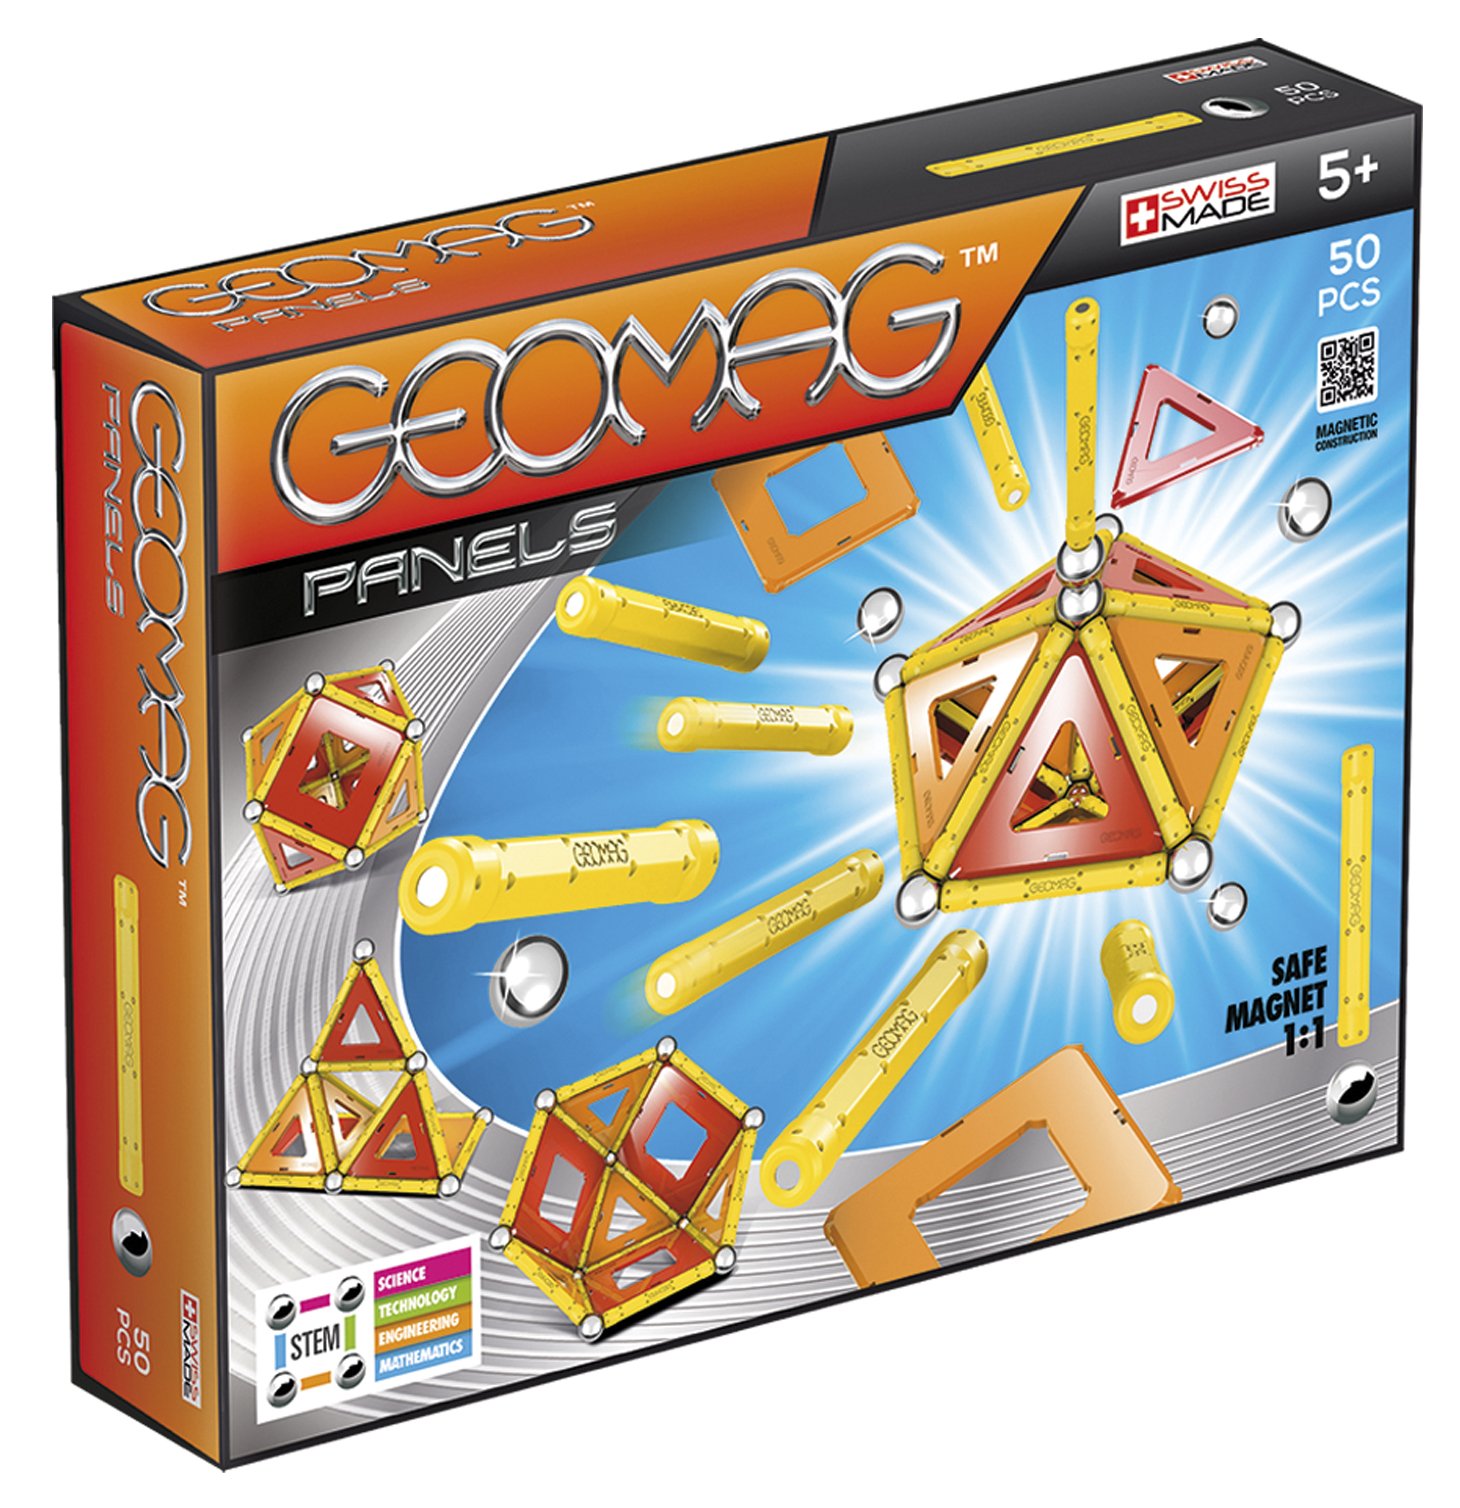 Geomag Panels Piece Construction Toy